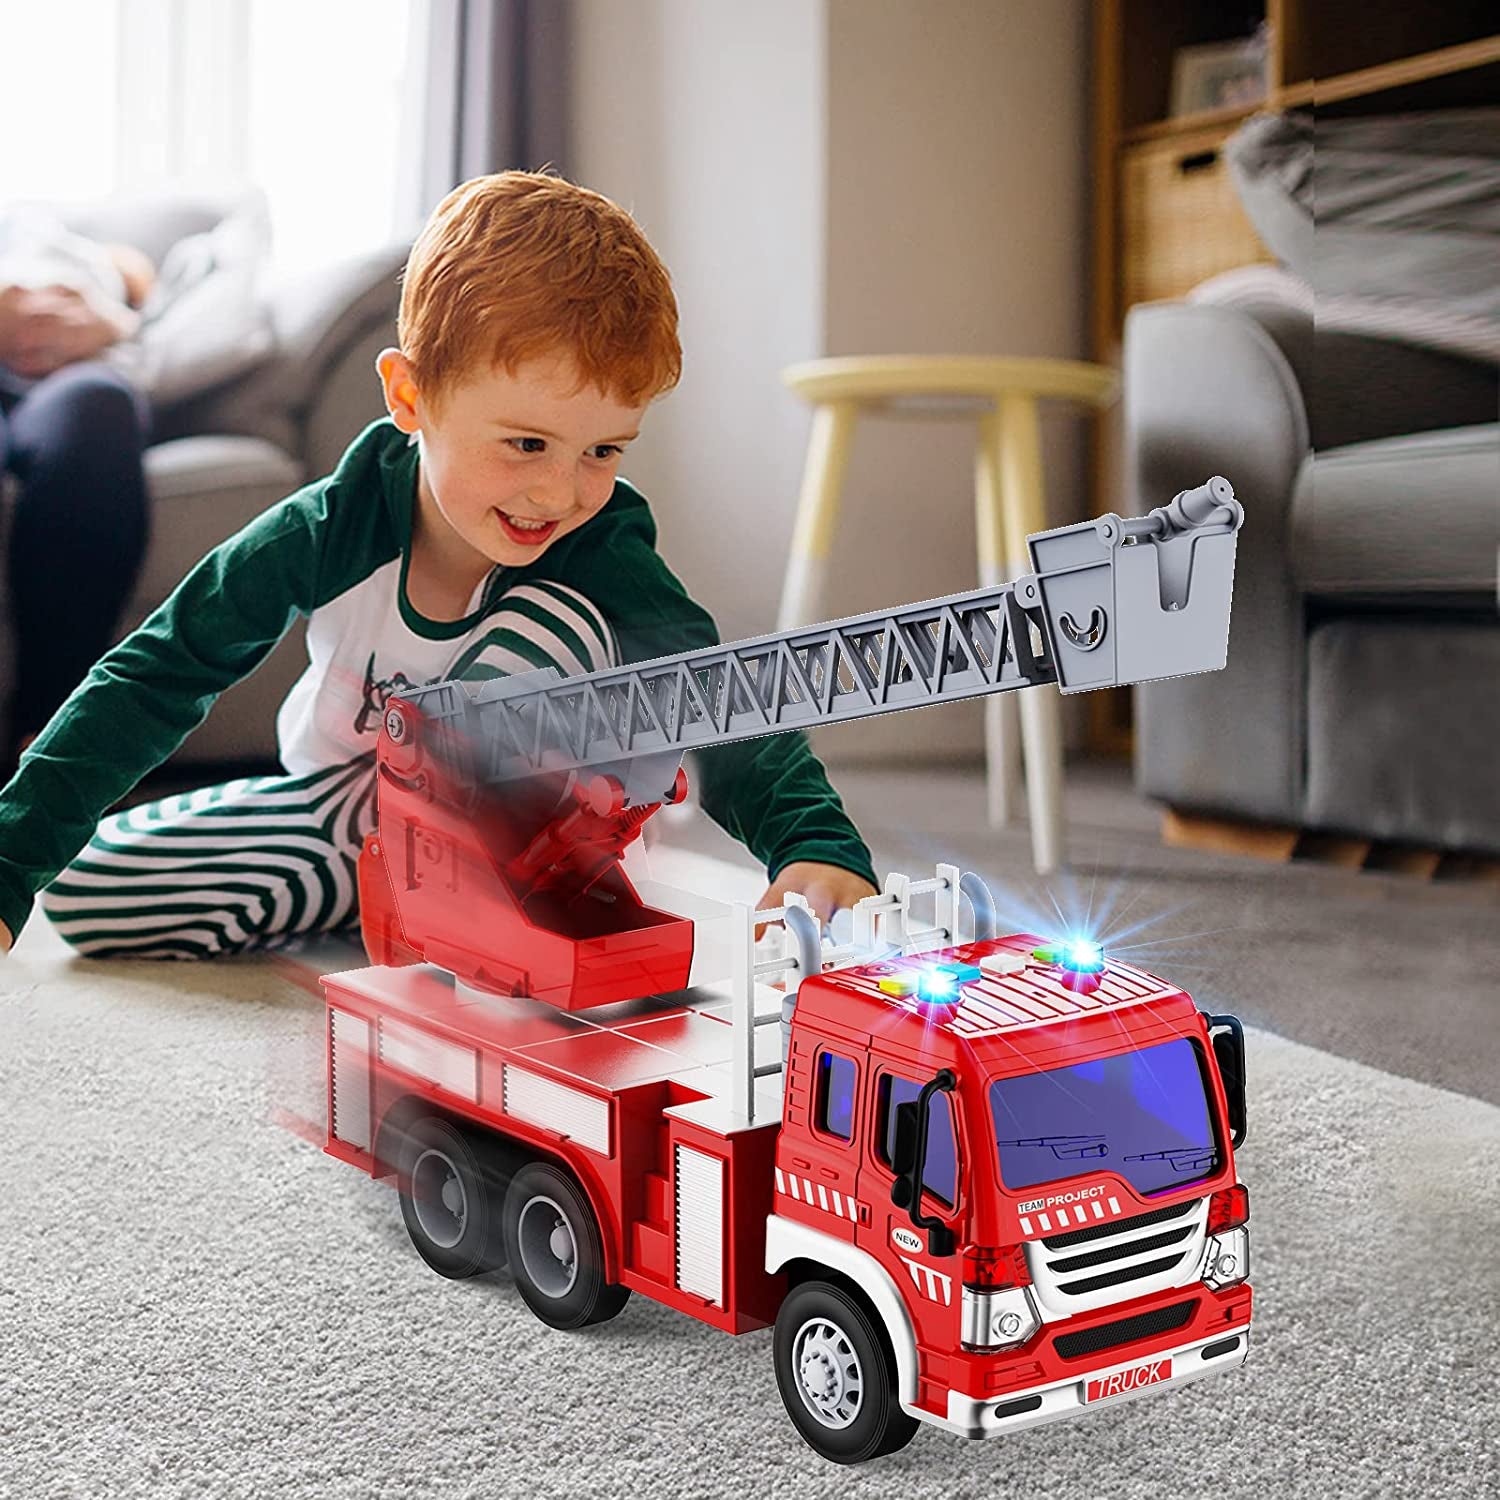 Fire Truck Toy, TOYABI Fire Truck Toys for 3 Year Old Boys, Toy Fire Truck for inside Play with Lights, Sirens Sounds and Extendable Resce Rotating Ladder, 12-Inch Fire Truck Best Gifts Toys for Boys